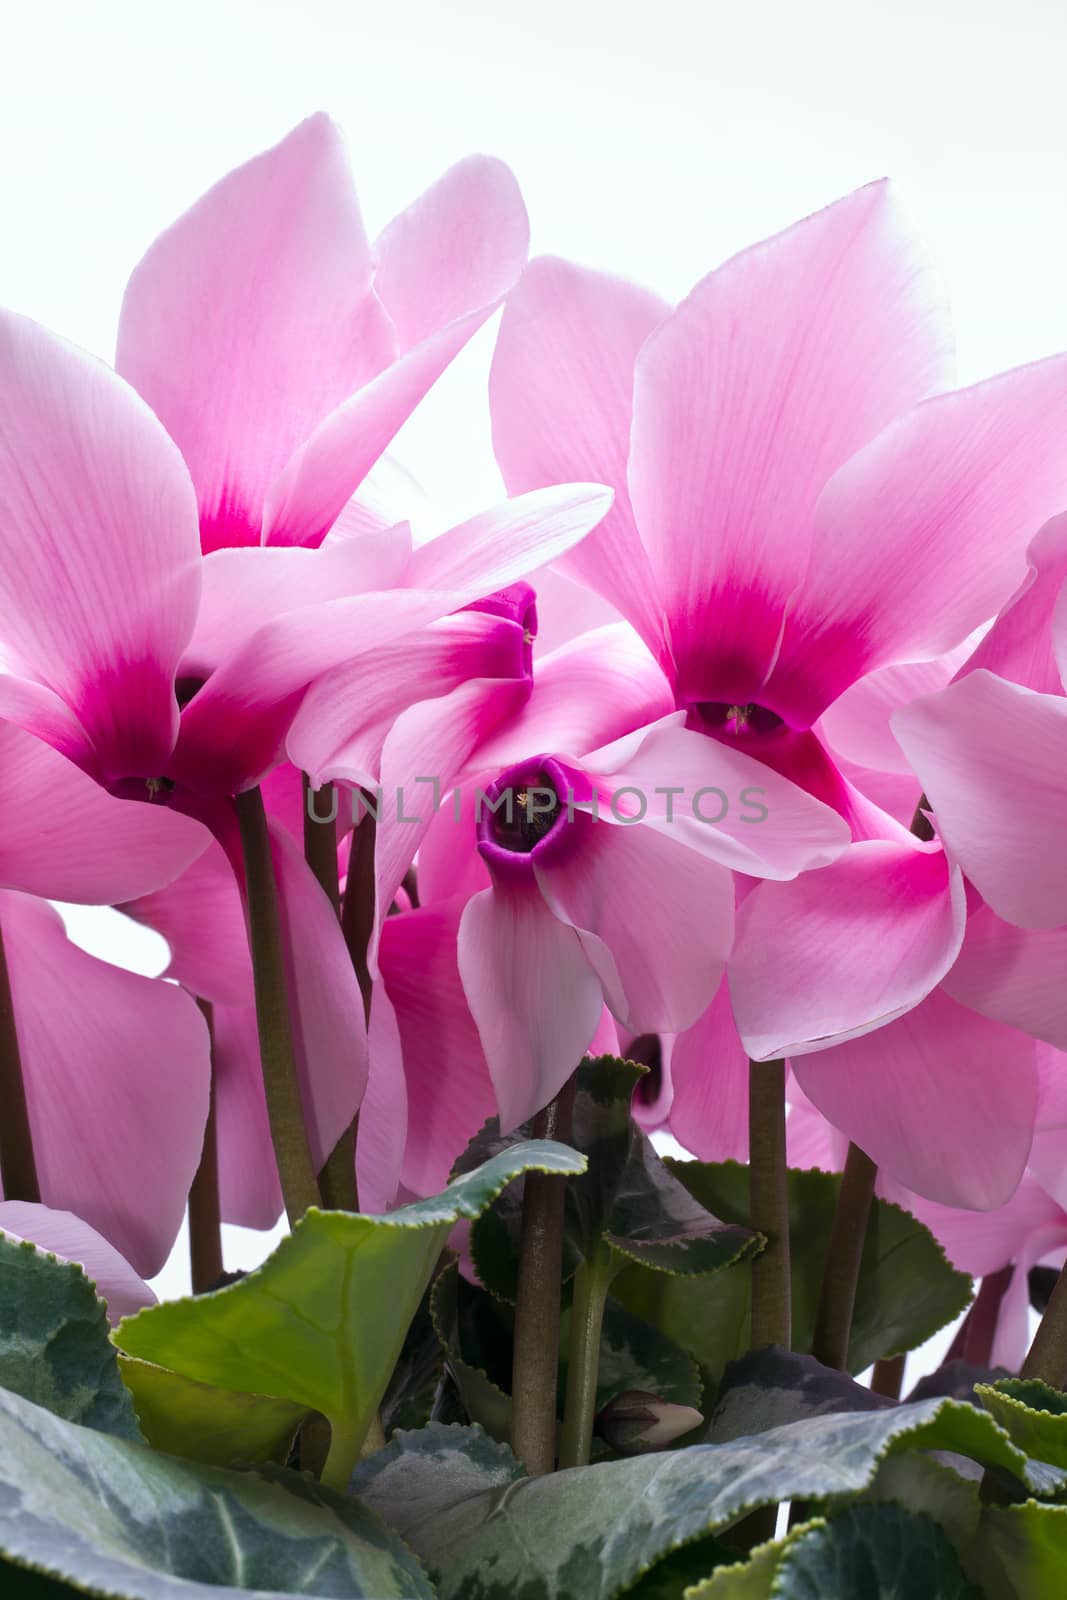 flowers of pink cyclamen - close up